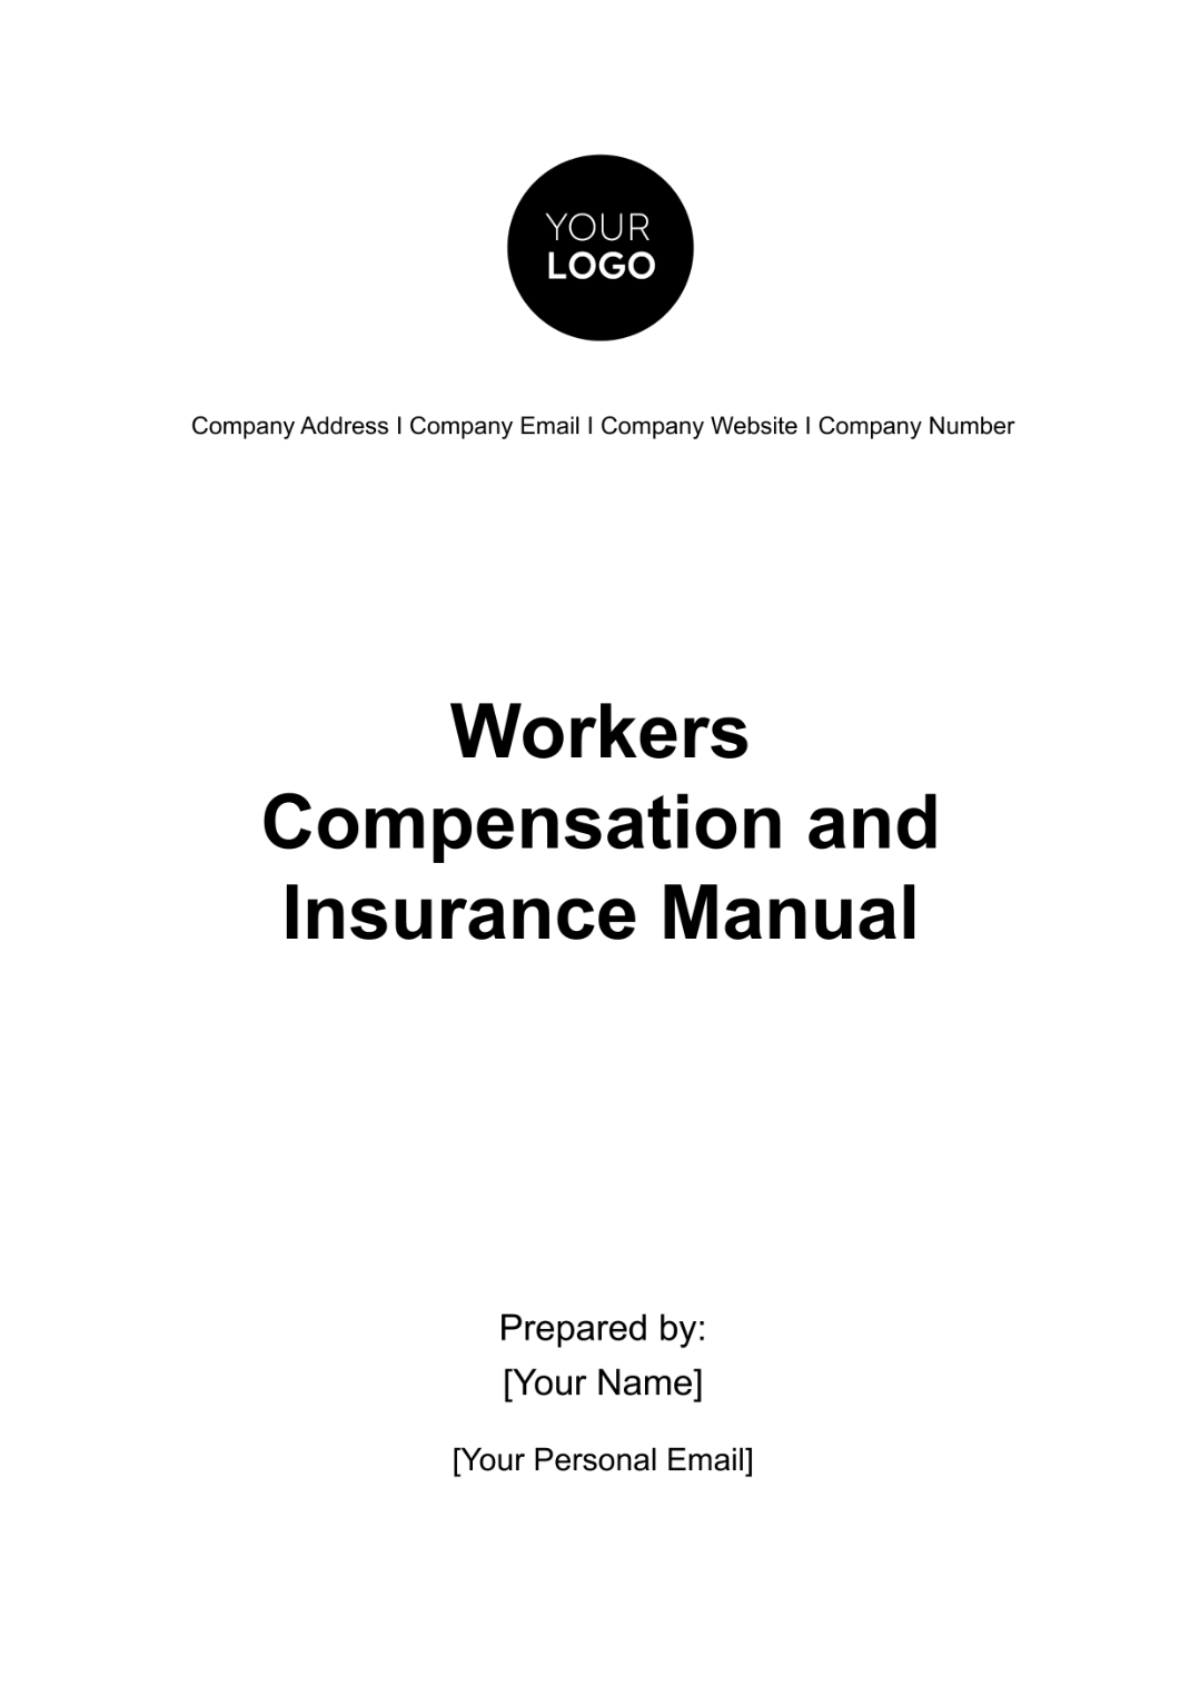 Workers Compensation and Insurance Manual HR Template